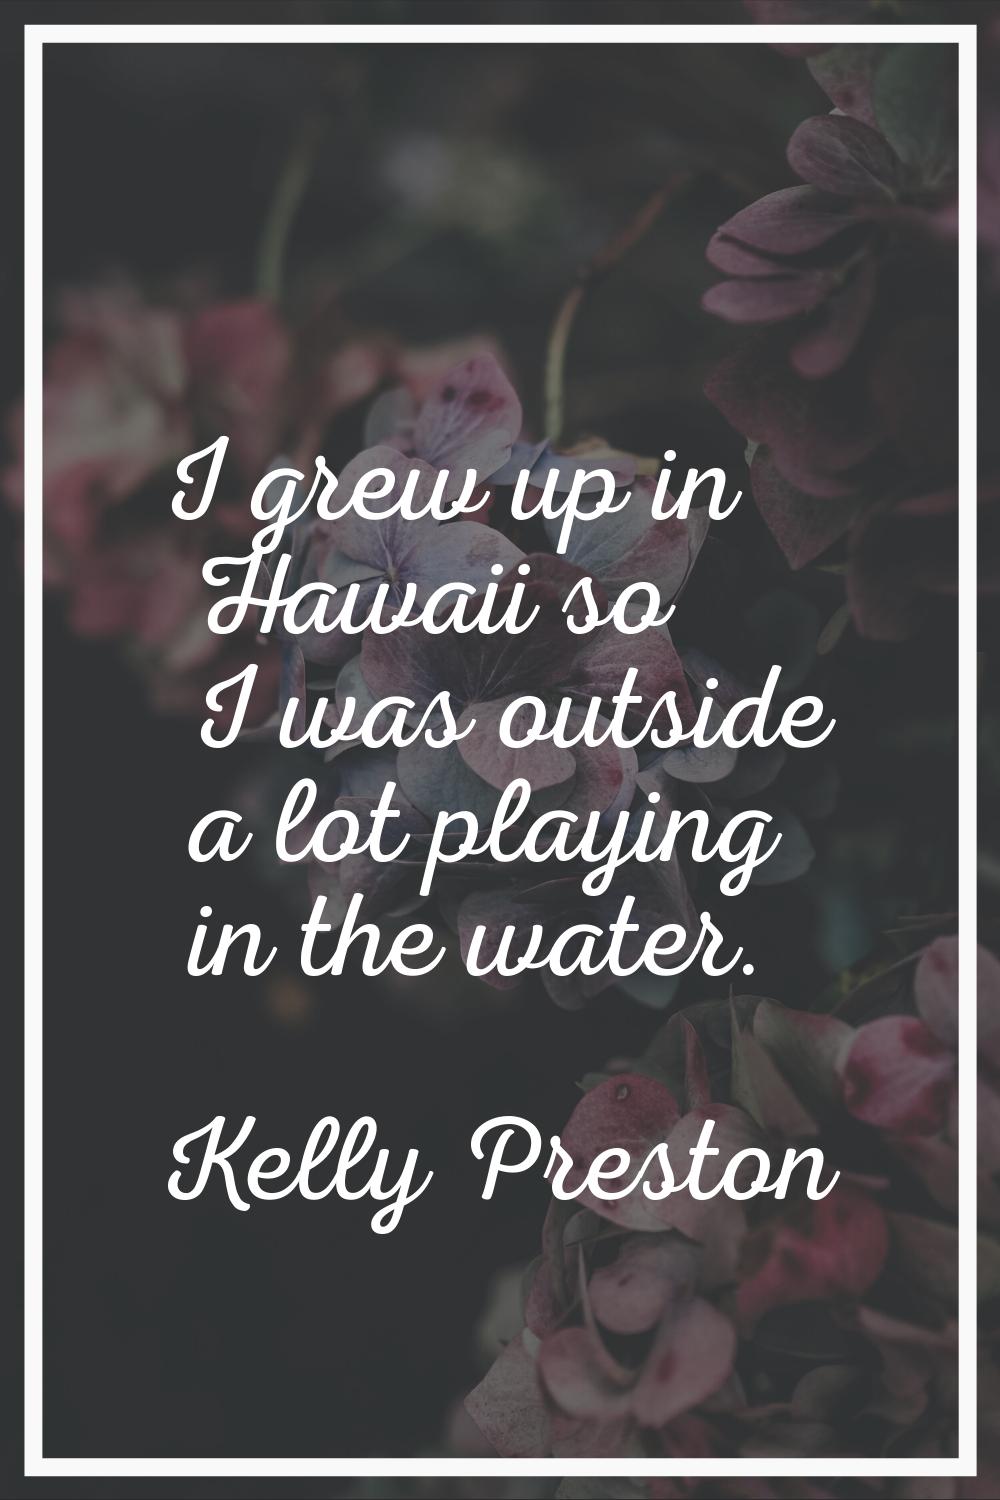 I grew up in Hawaii so I was outside a lot playing in the water.